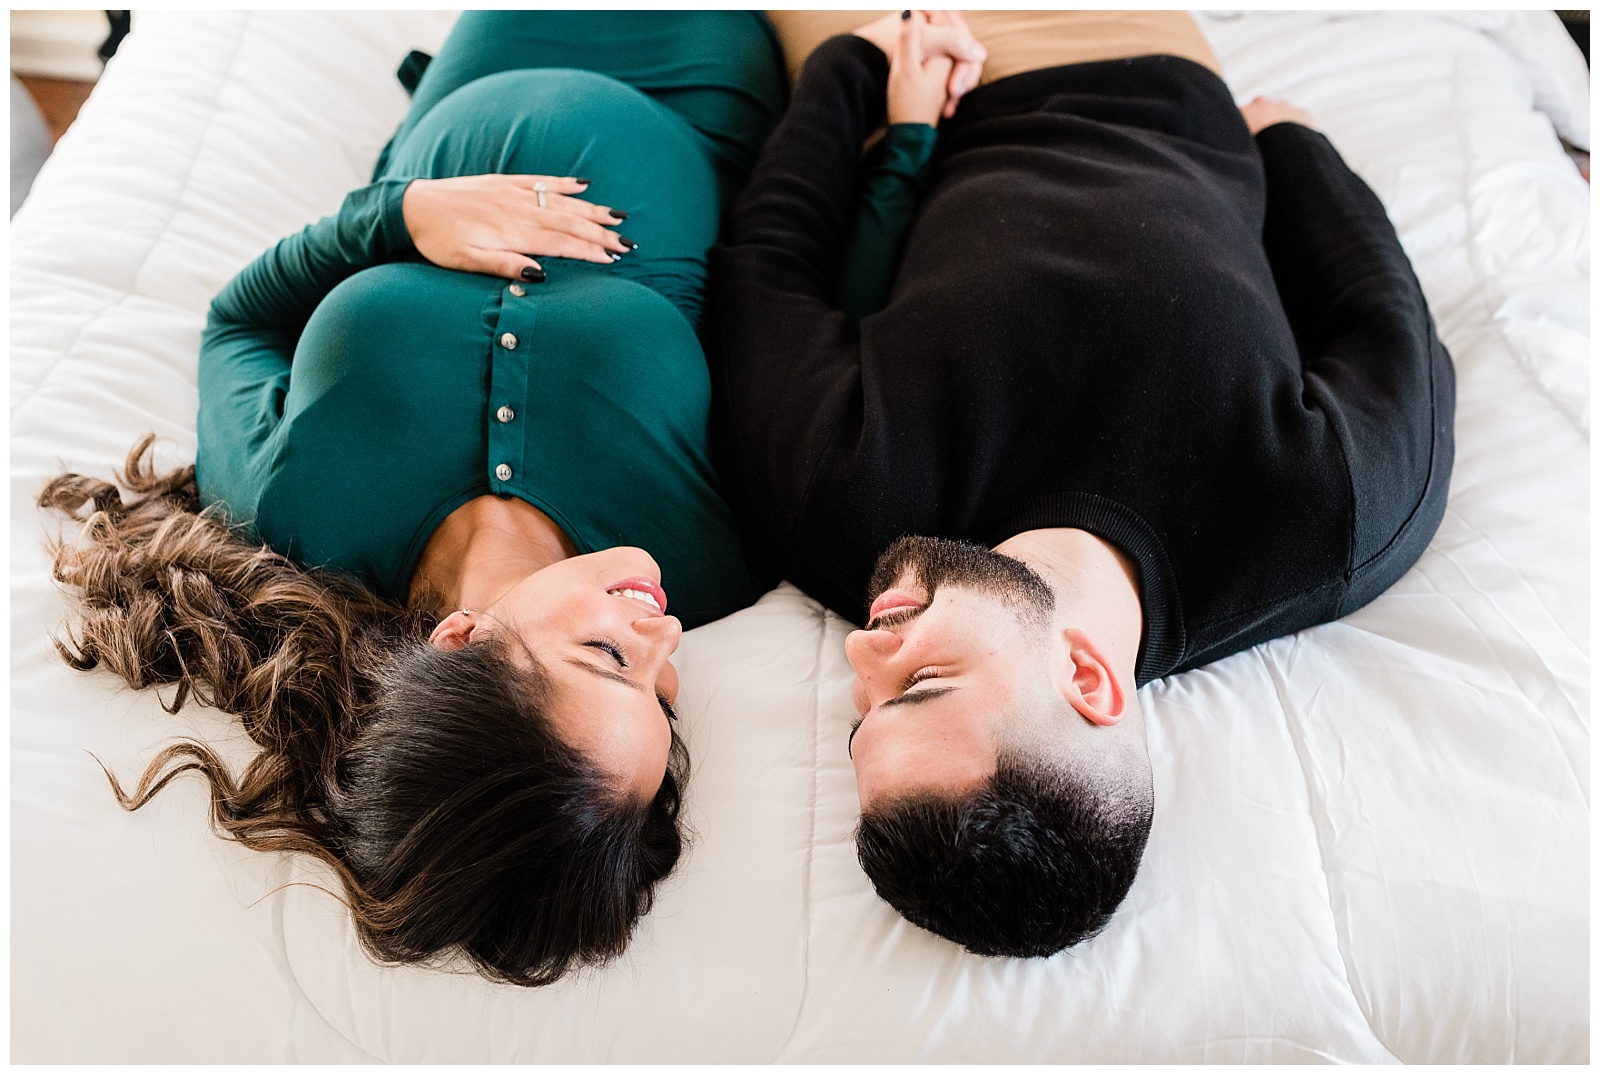 In Home Maternity Session, Nursery, Baby, New Parents, Maternity Shoot, Pregnant, Pregnancy Photos, New Jersey, Photographer, Baby Boy, Bed, Lay Down, Bedroom, Photo